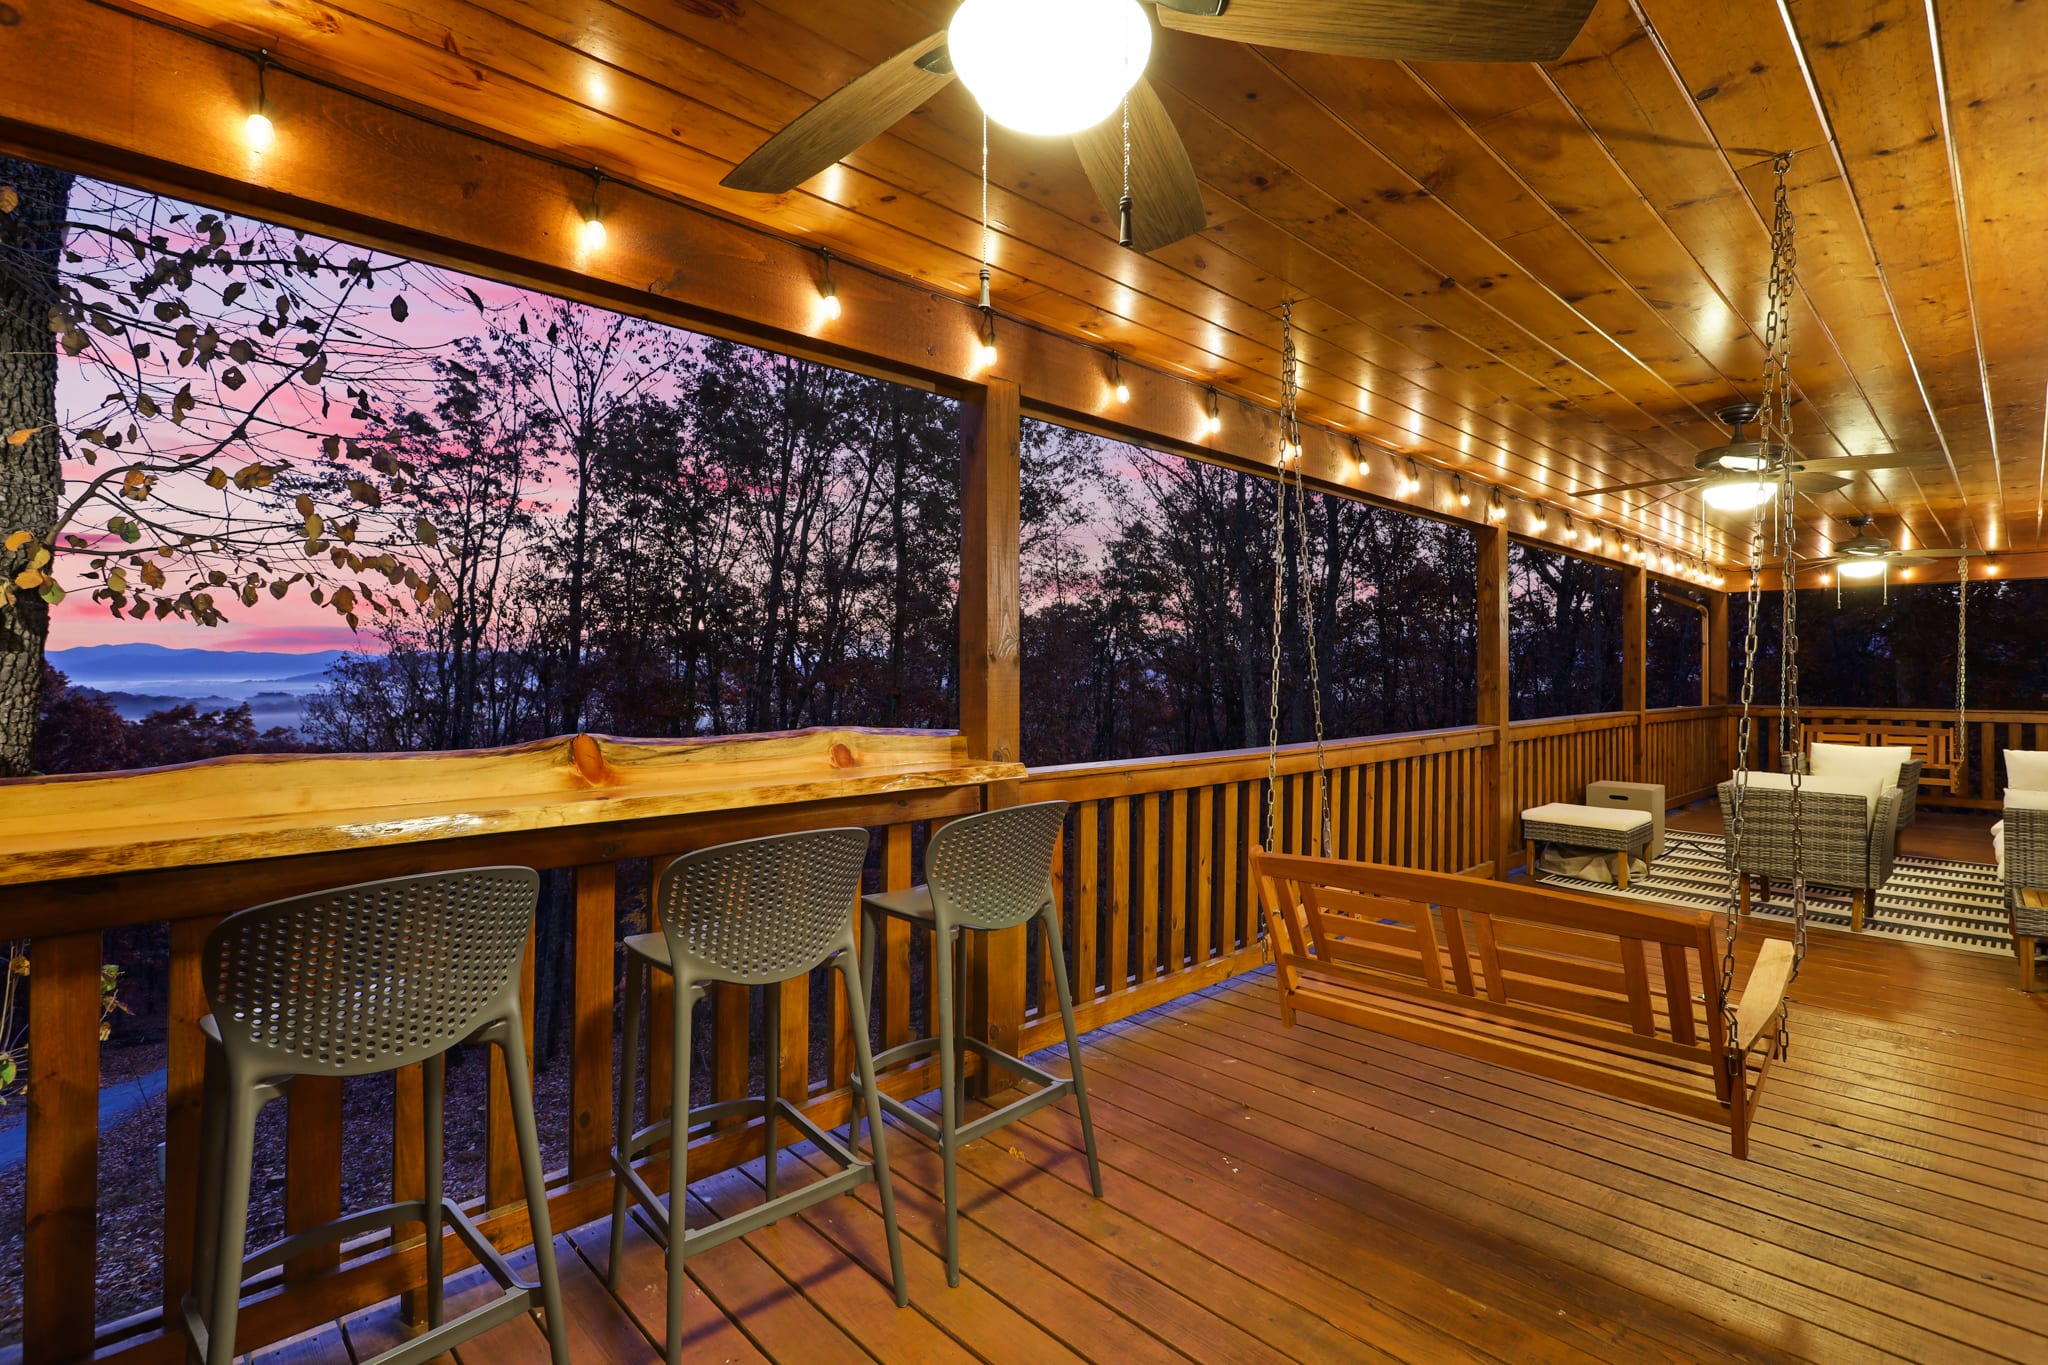 Enjoy the stunnning sunrise from the large porch!